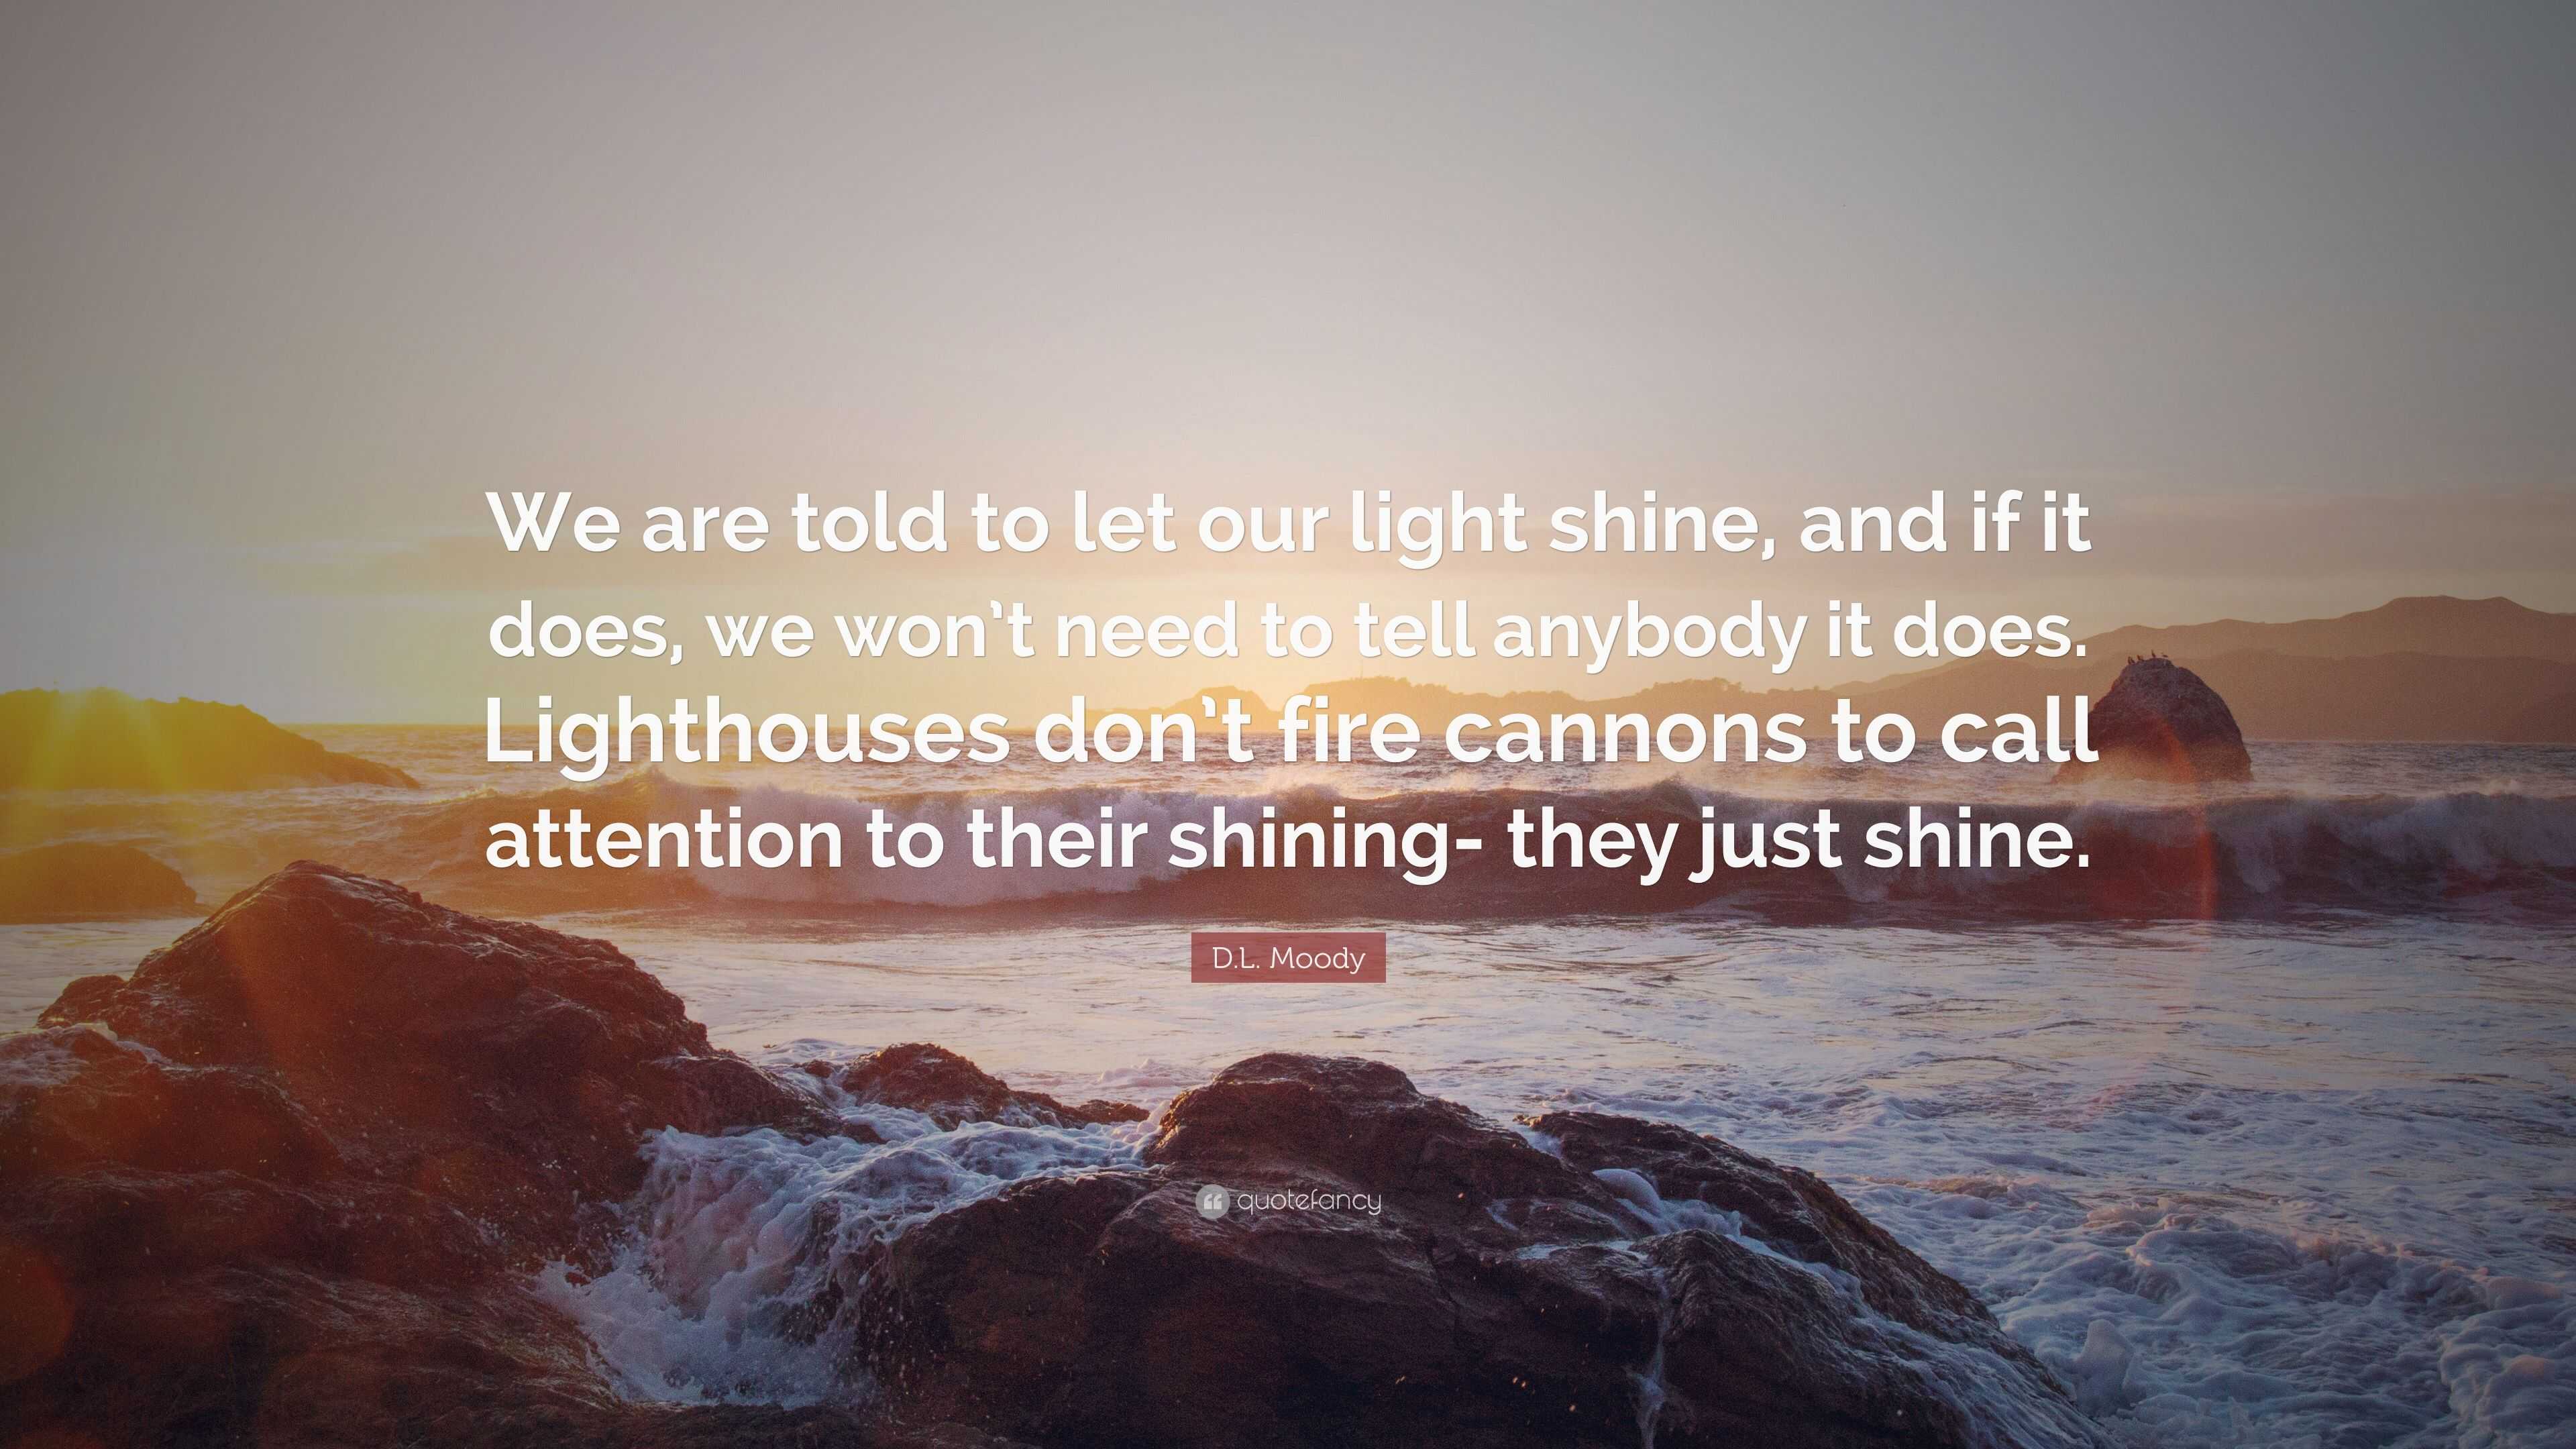 D L Moody Quote We Are Told To Let Our Light Shine And If It Does We Won T Need To Tell Anybody It Does Lighthouses Don T Fire Cannon